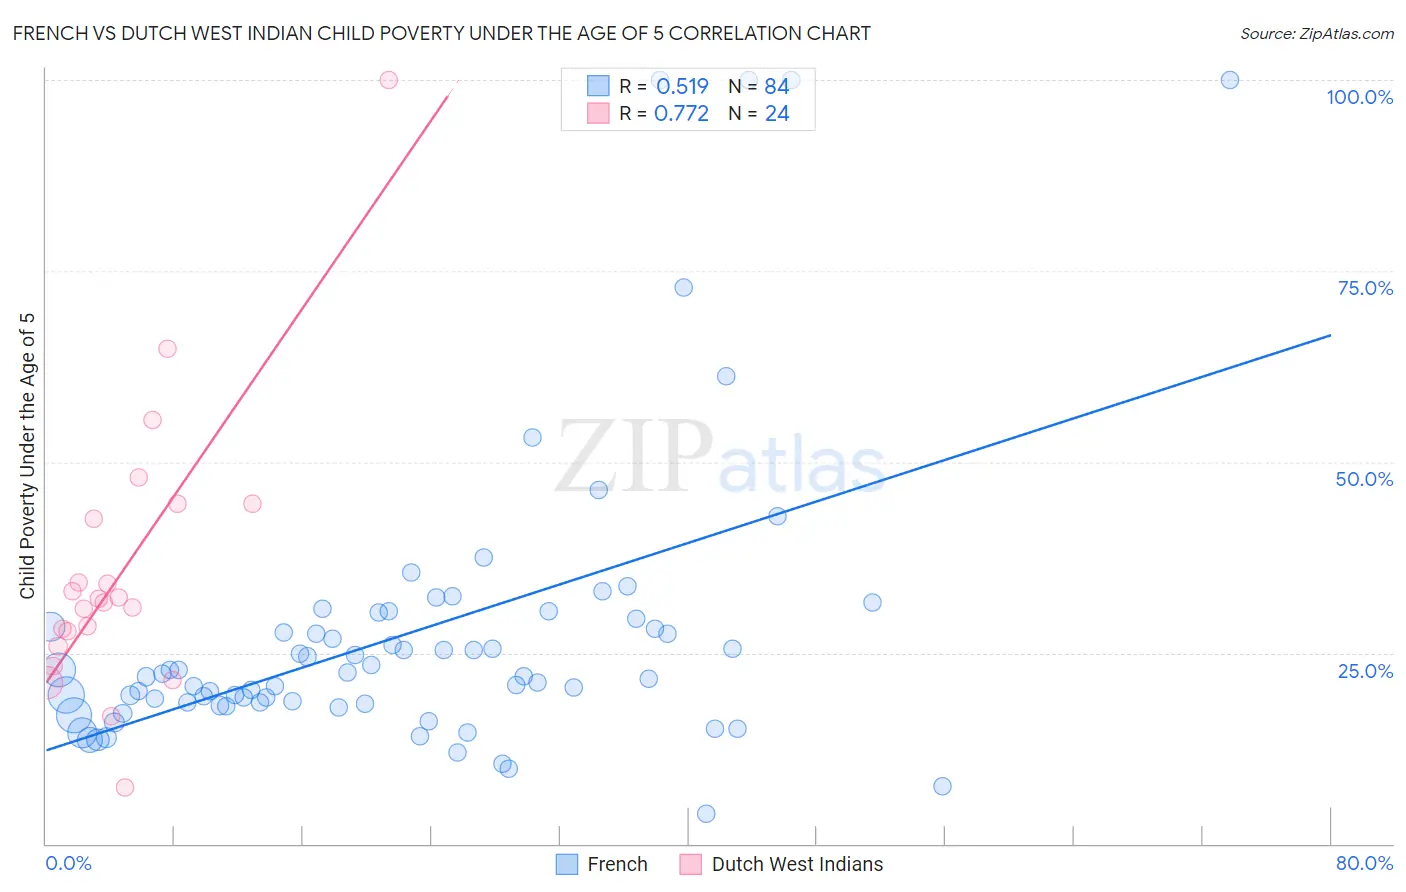 French vs Dutch West Indian Child Poverty Under the Age of 5